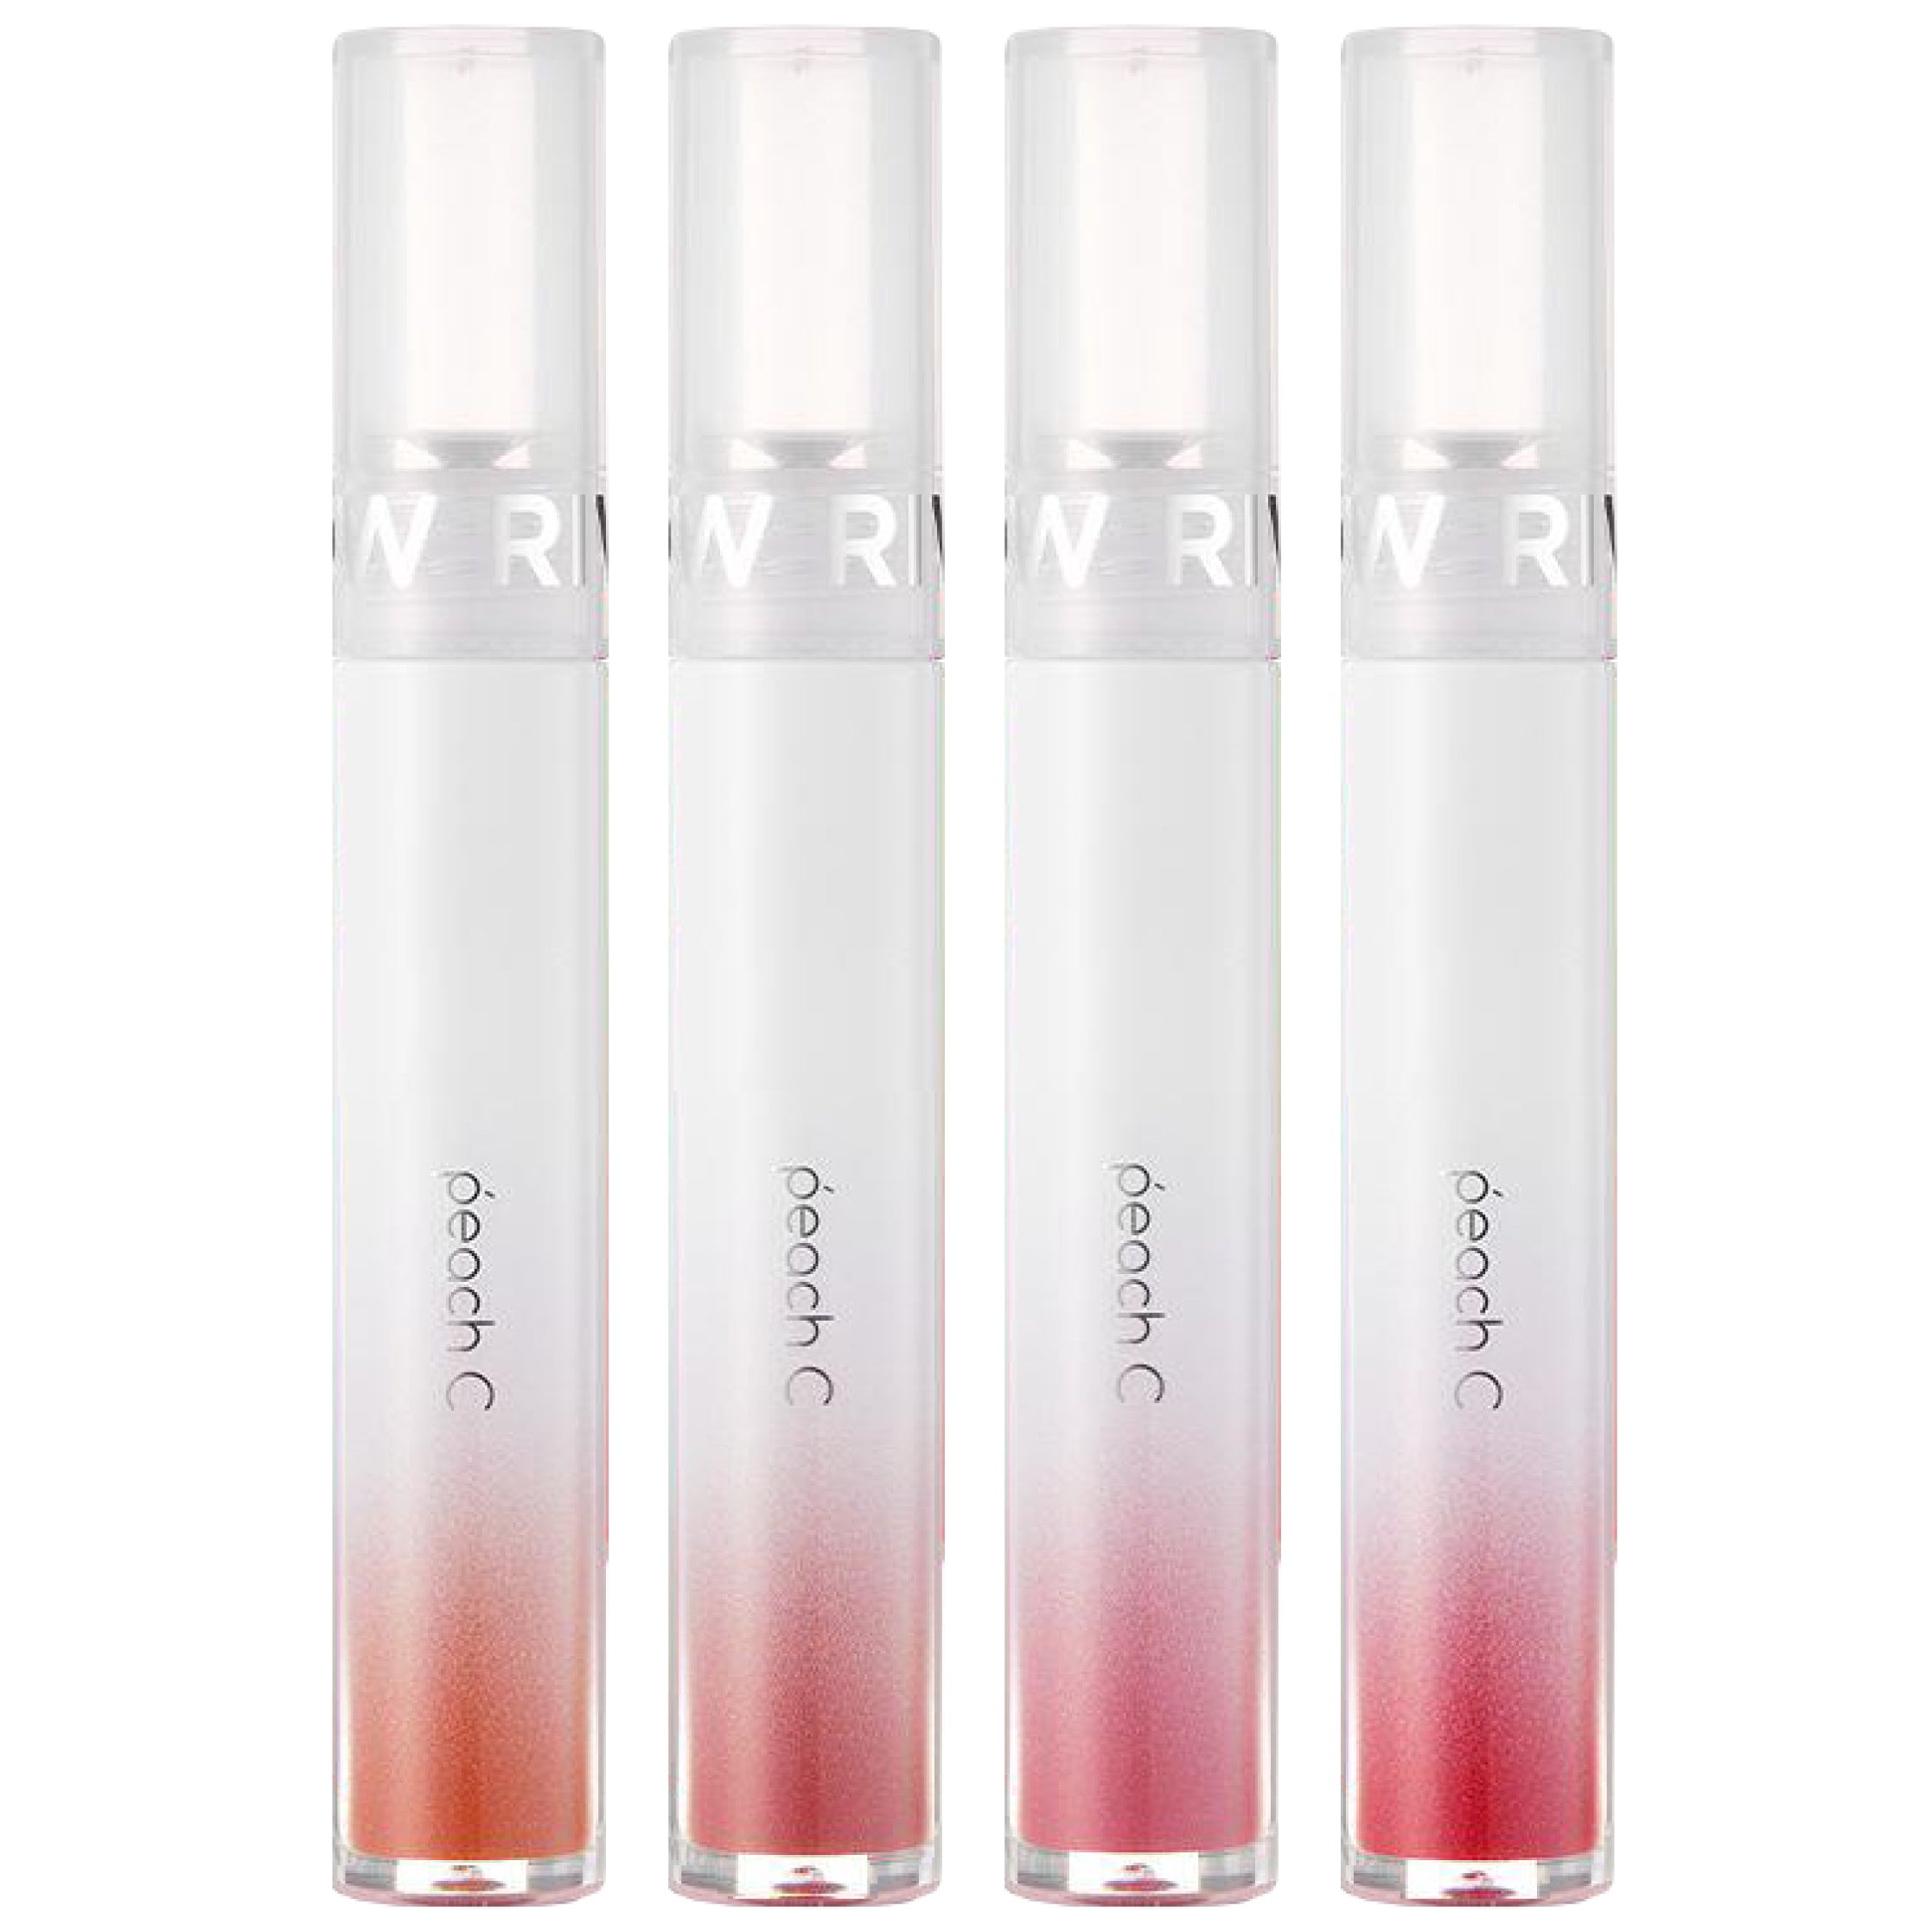 Peach C River Glow Lip Tint - All 4 Shades Collection 